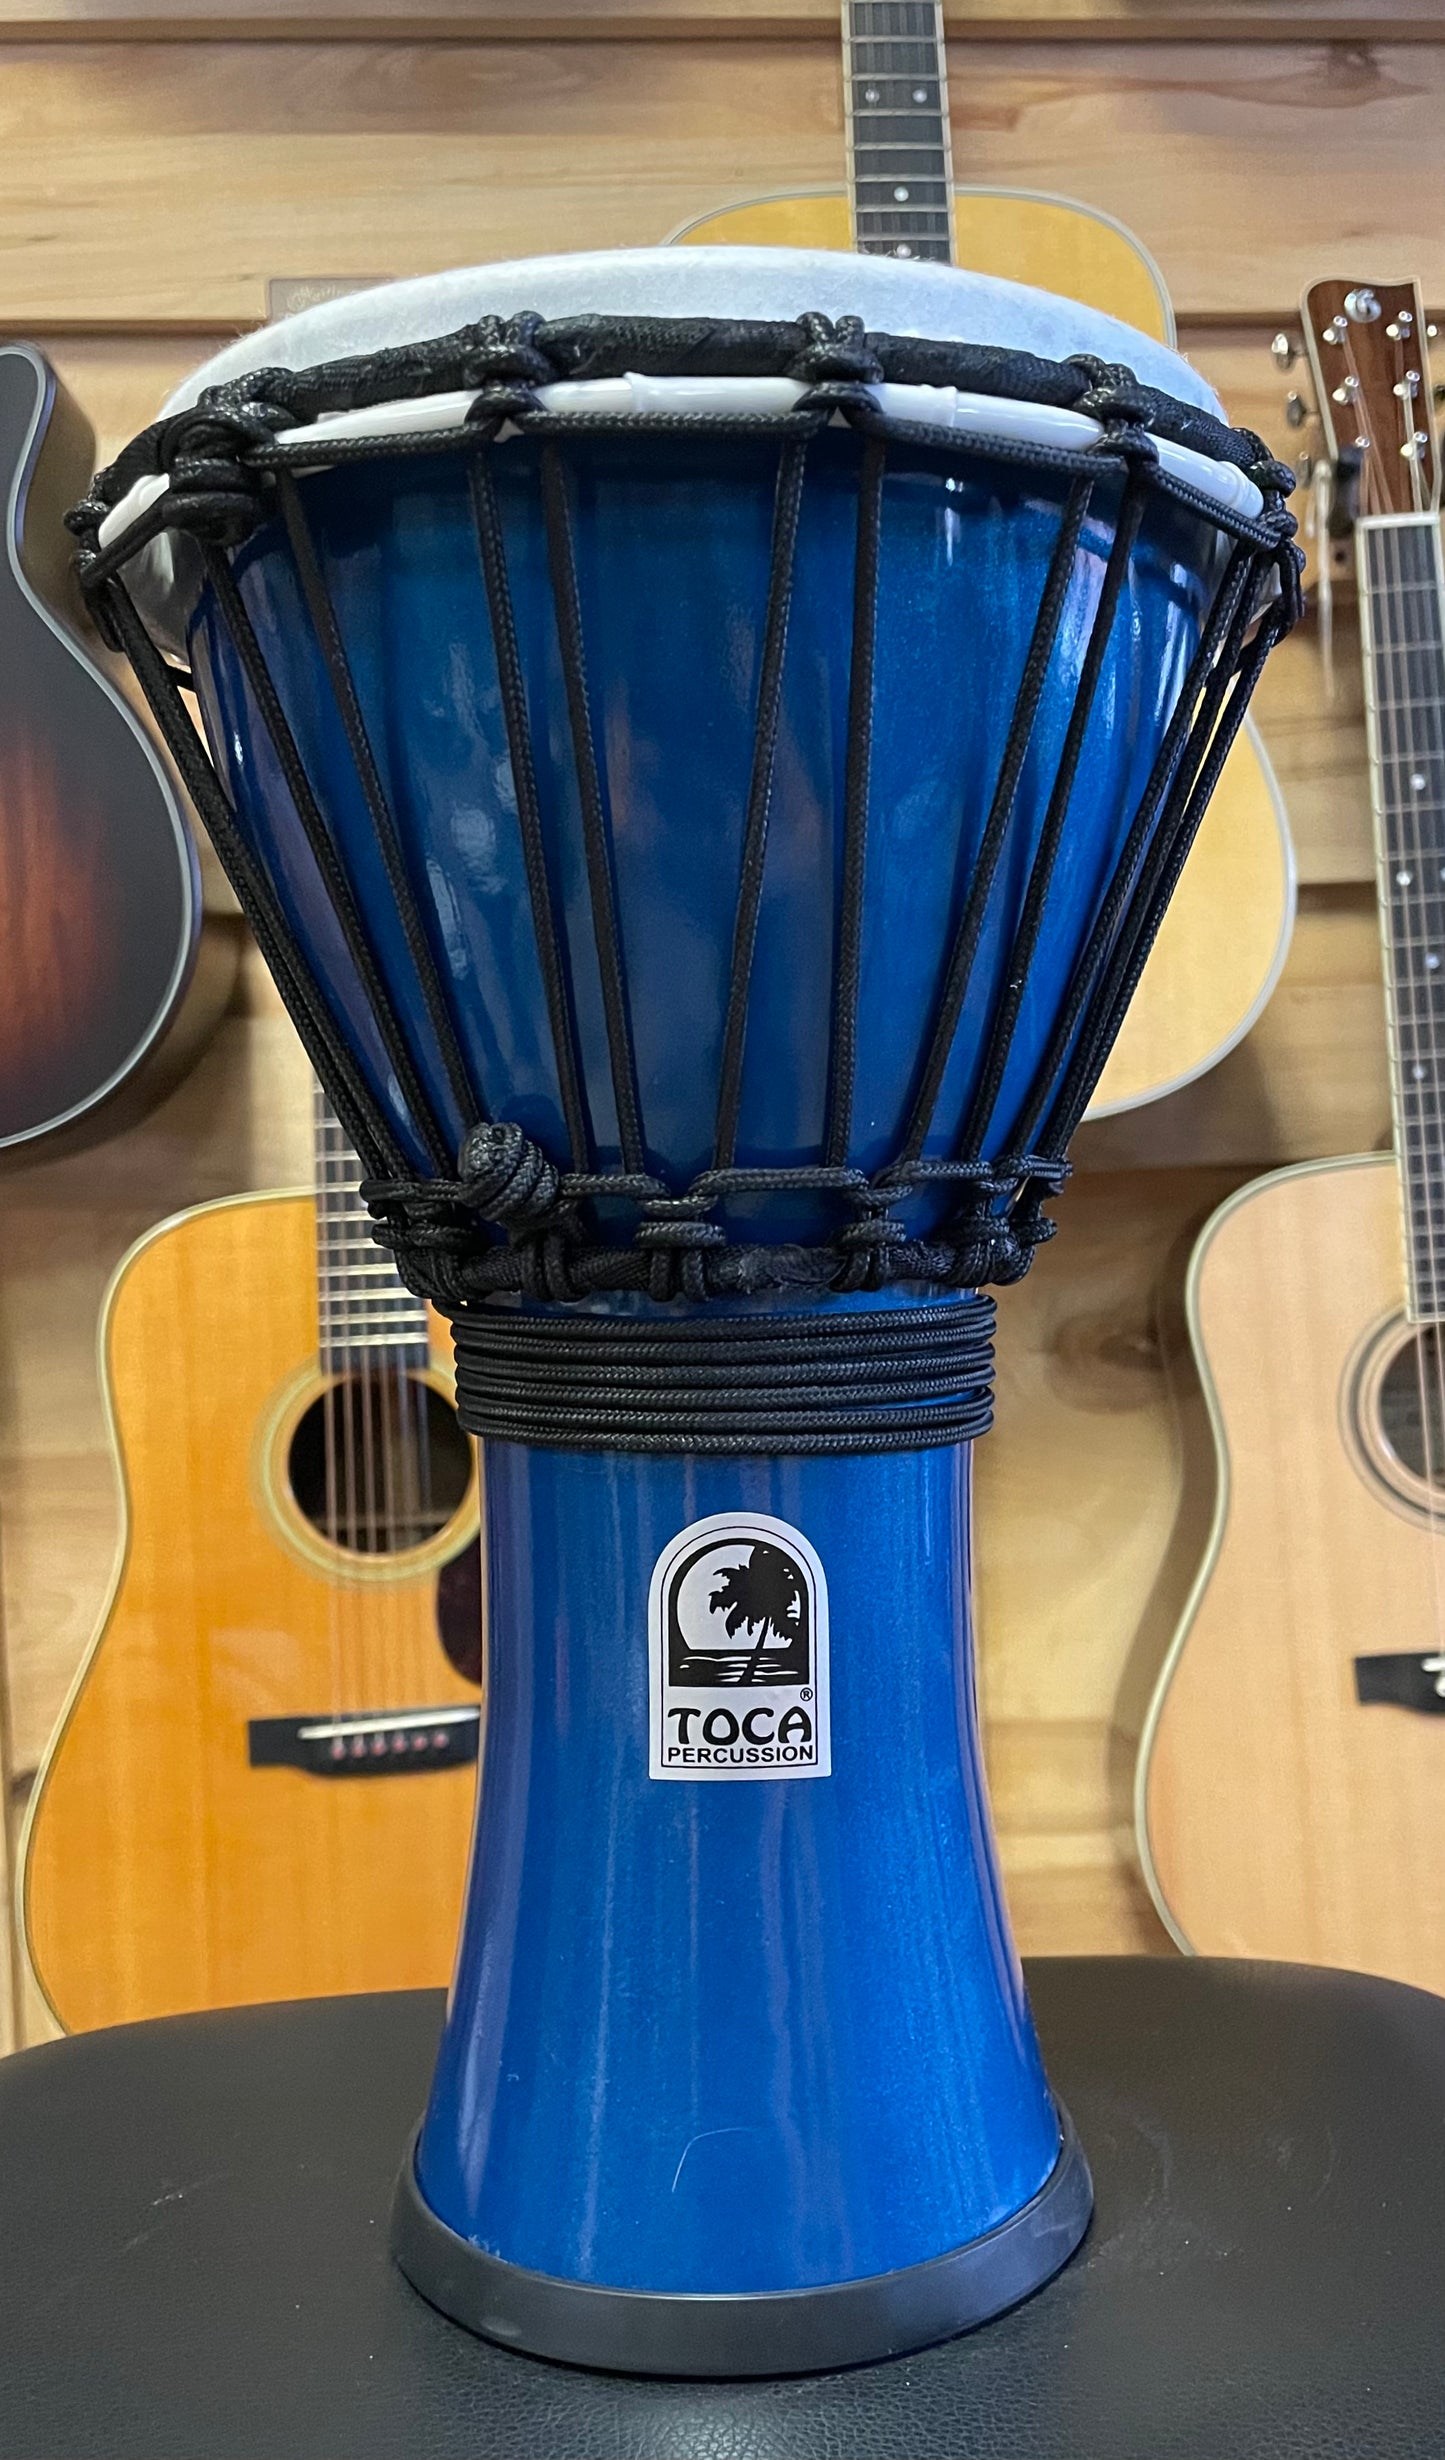 Toca Freestyle ColorSound Djembe Metallic Blue 7 in. (NEW)